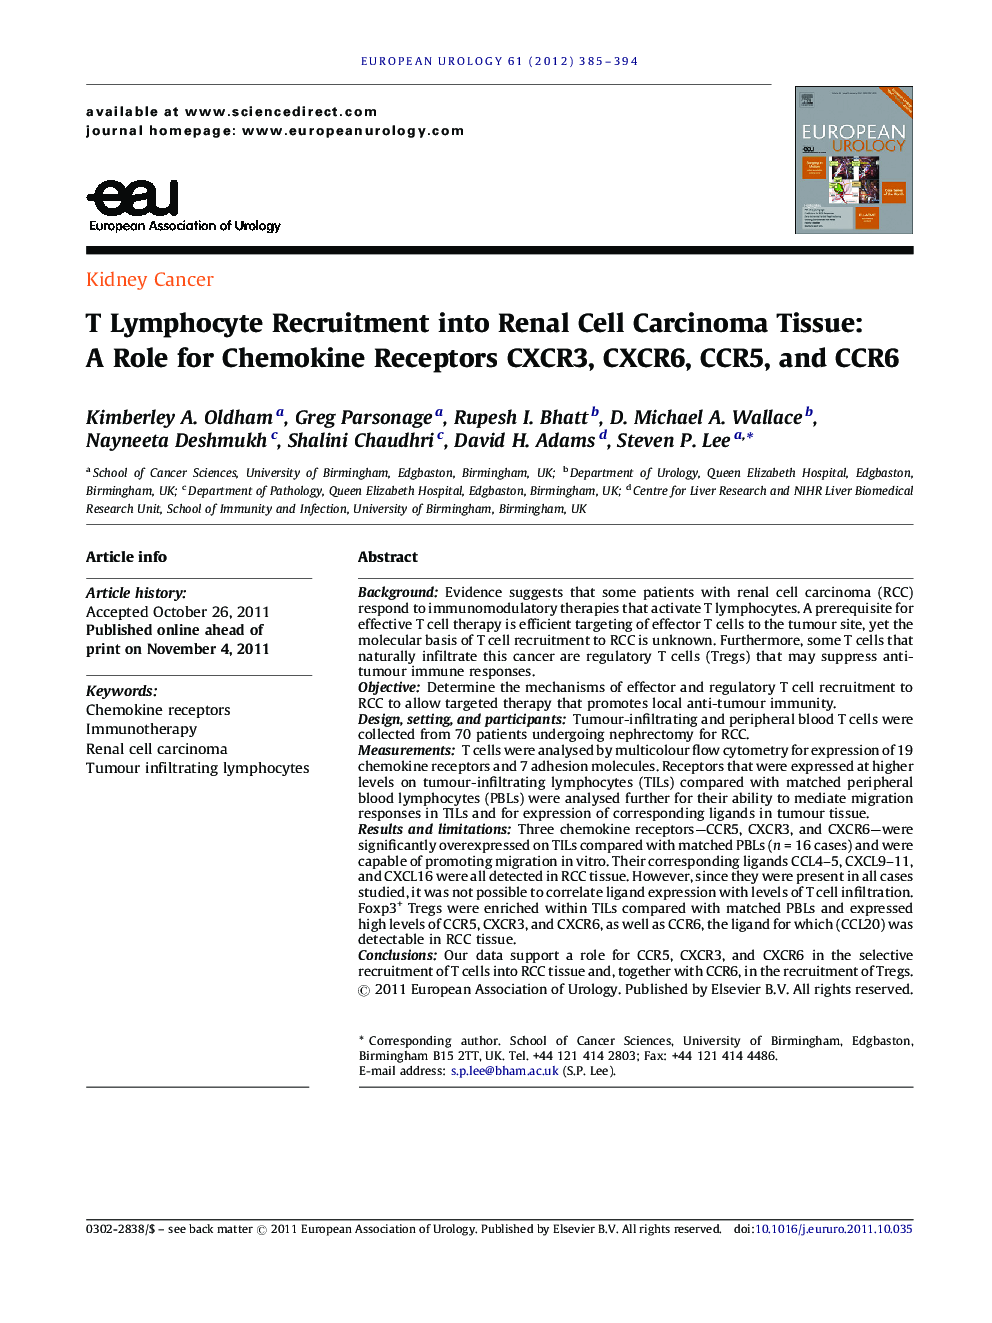 T Lymphocyte Recruitment into Renal Cell Carcinoma Tissue: A Role for Chemokine Receptors CXCR3, CXCR6, CCR5, and CCR6